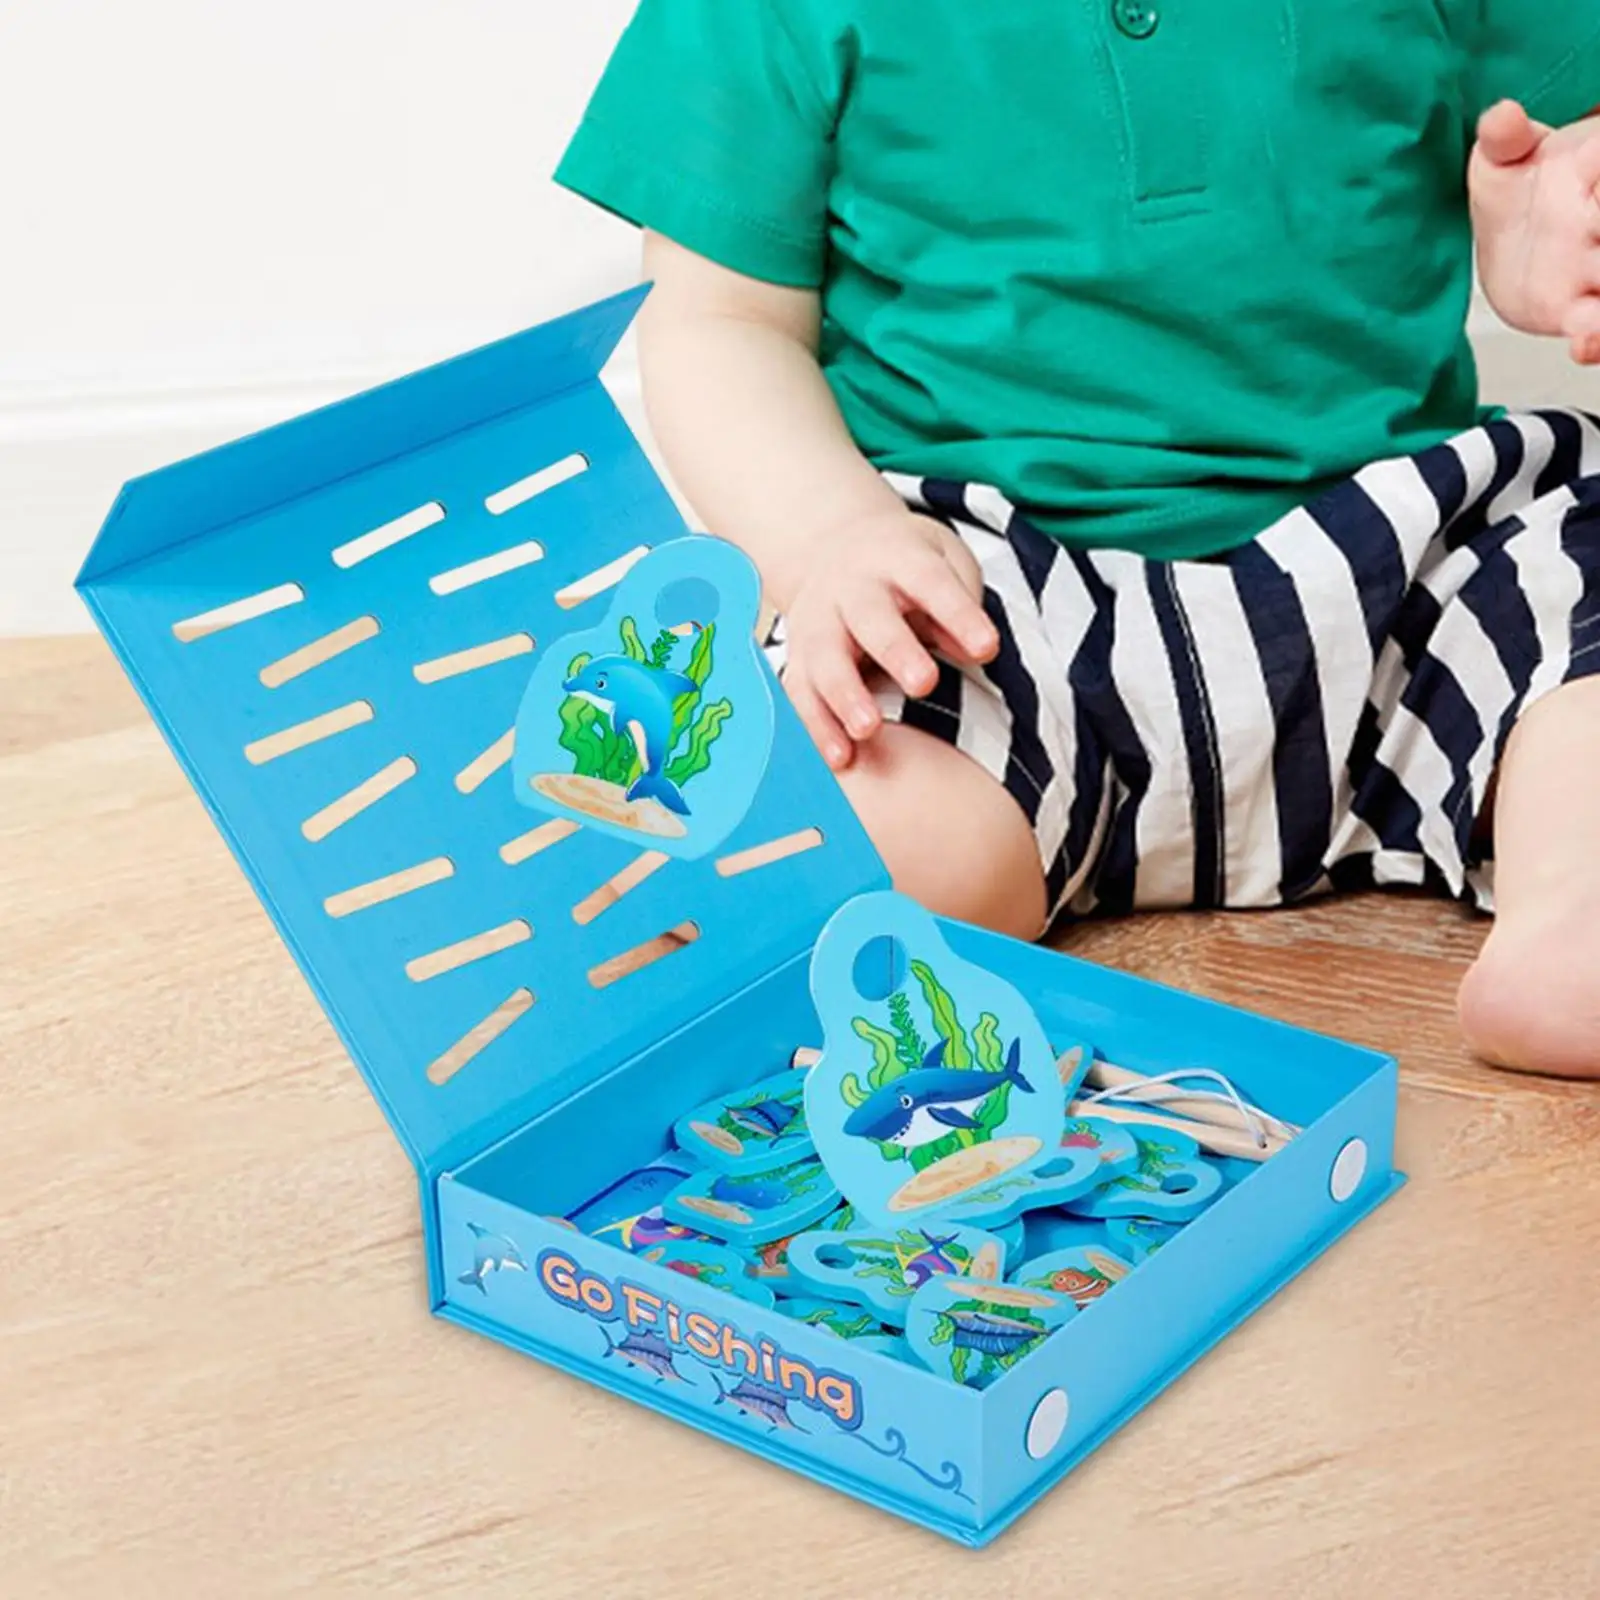 Wooden Fishing Game Toy Set with 10 Aquatic Creatures Pool Fishing Games for Kids Boys Girls